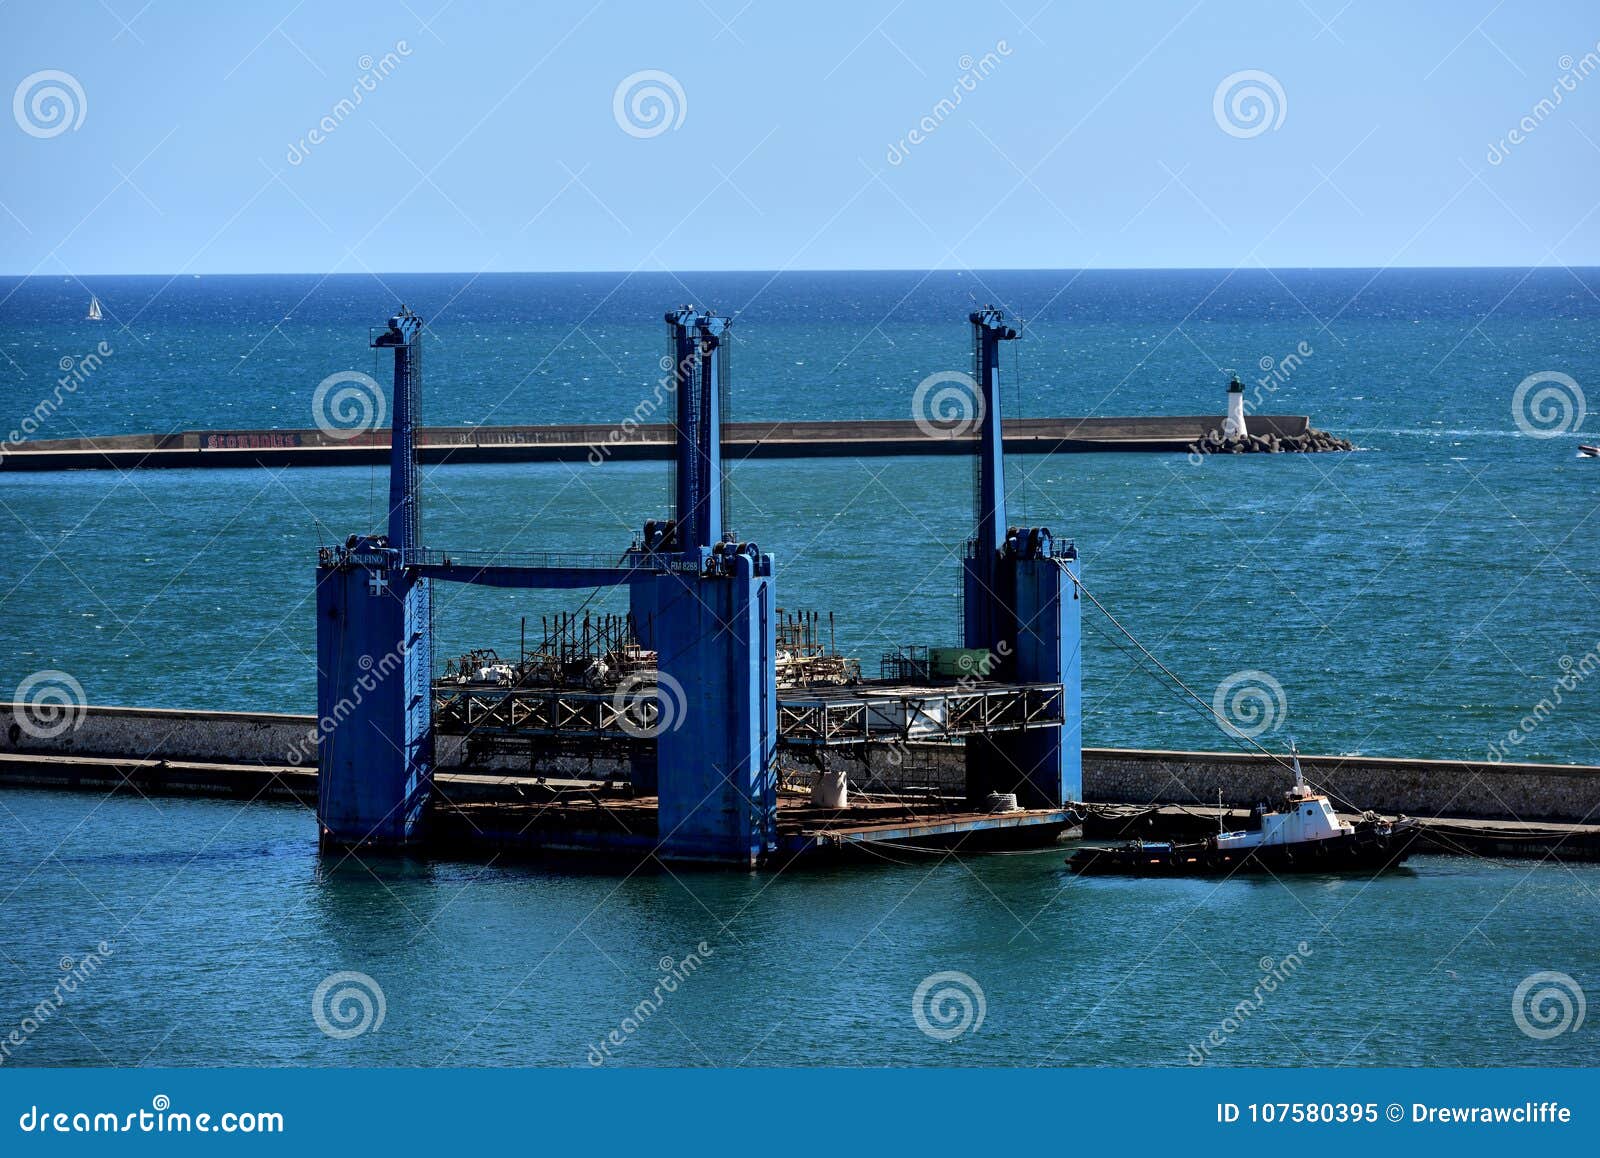 Floating Dock in the Port of Cagliari Editorial Image - Image of sunken,  wall: 107580395